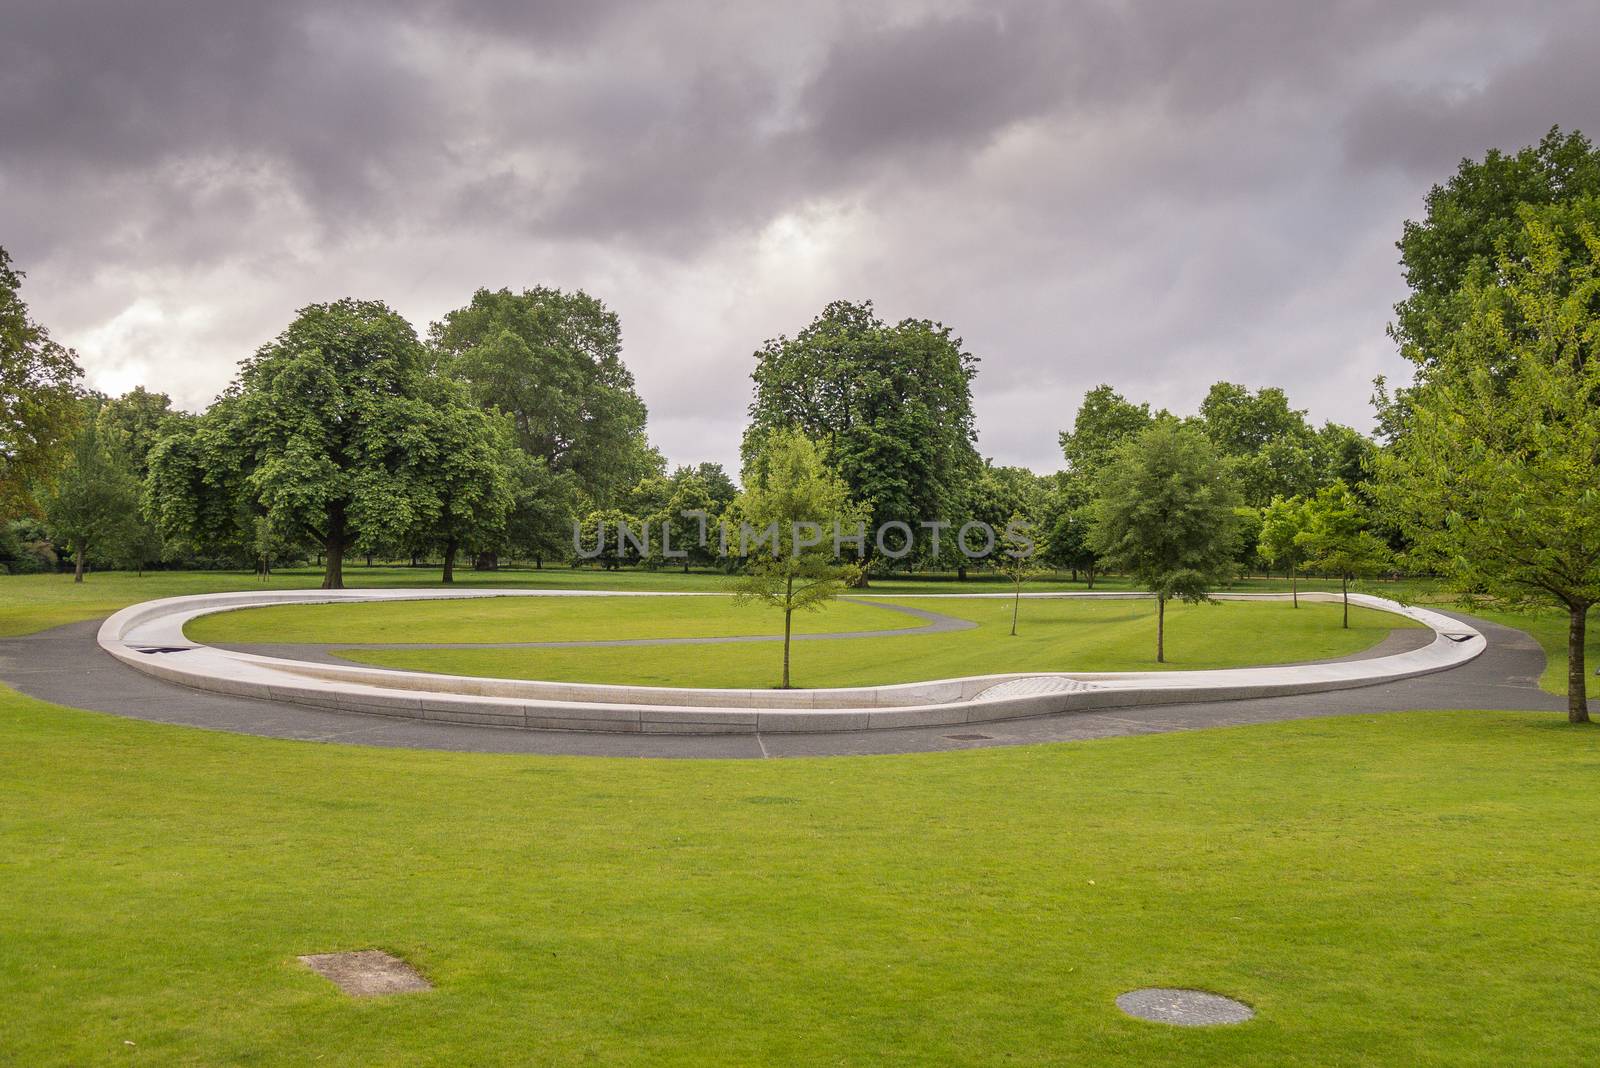 This free entry unique Memorial to Diana, Princess of Wales was opened by Her Majesty The Queen on 6th July 2004.  This photo was taken early before the water (and crowds) started flowing.